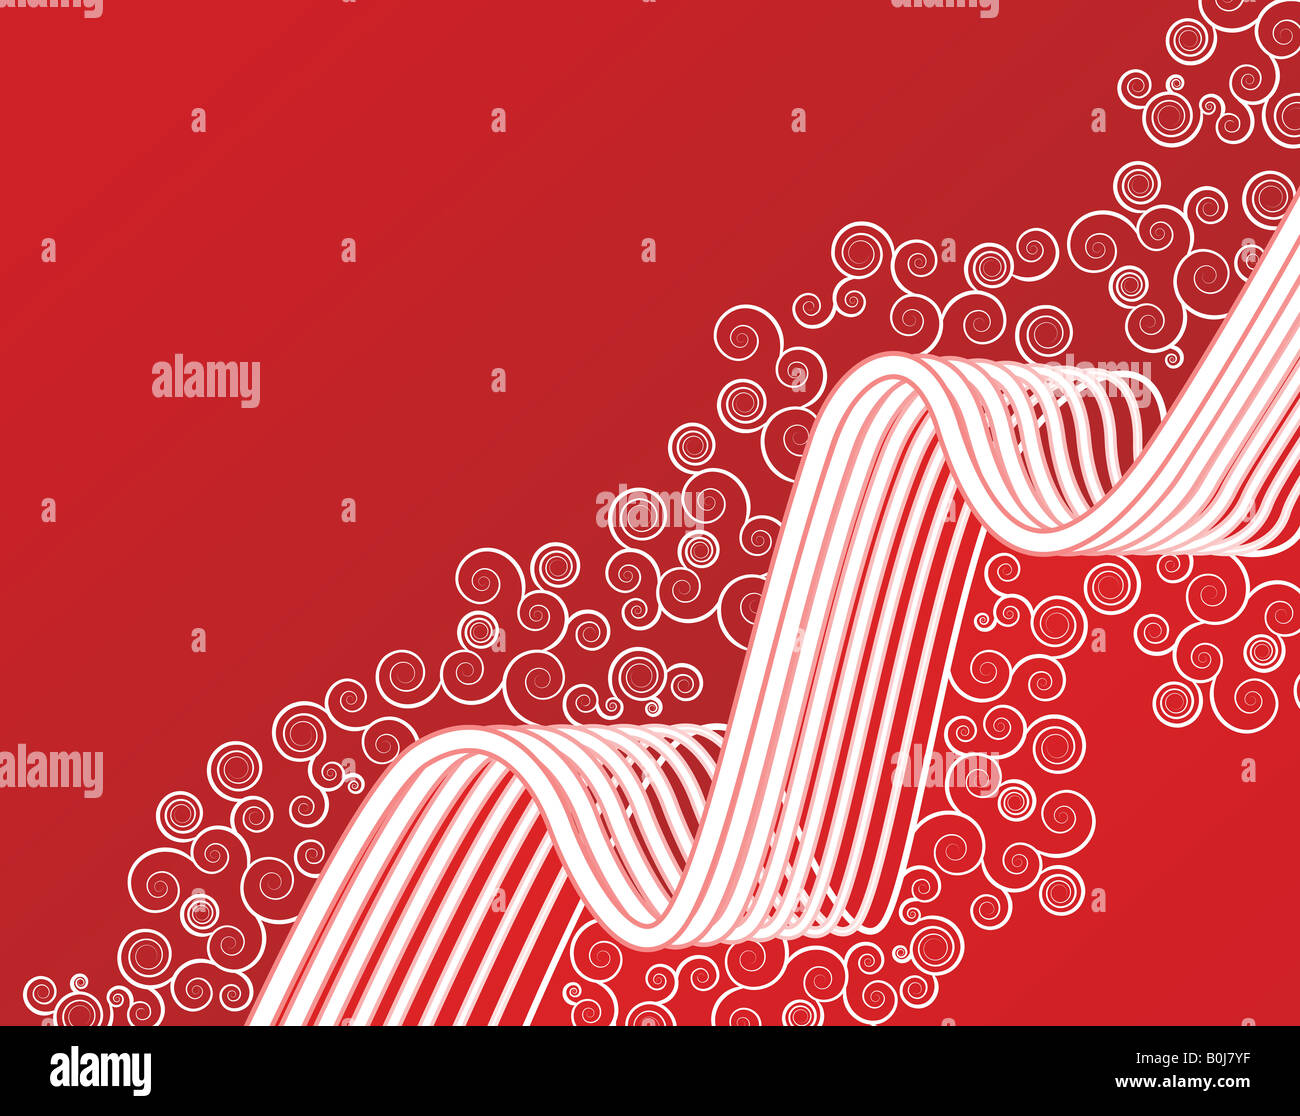 Vector illustration of a red spirals and lined art background Stock Photo